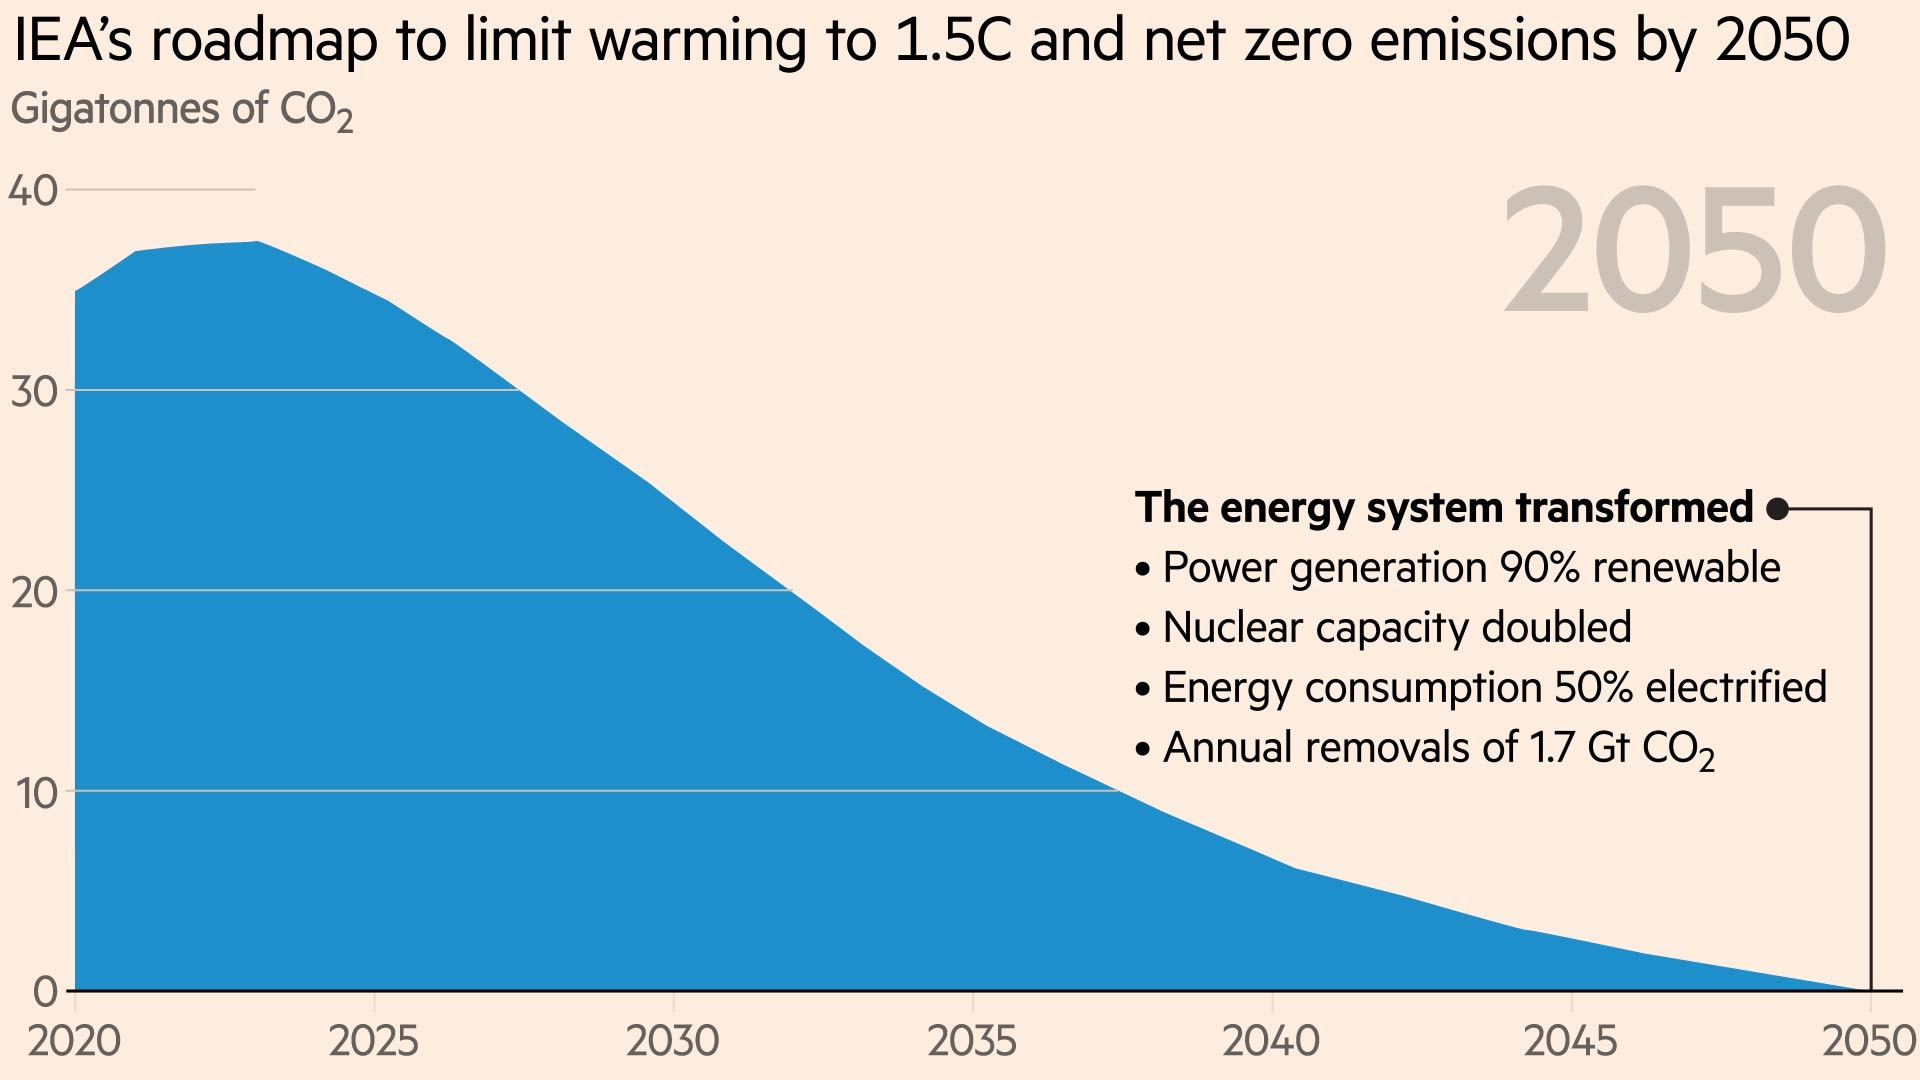 Chart showing the IEA’s roadmap to limit warming to 1.5C and net zero emissions by 2050